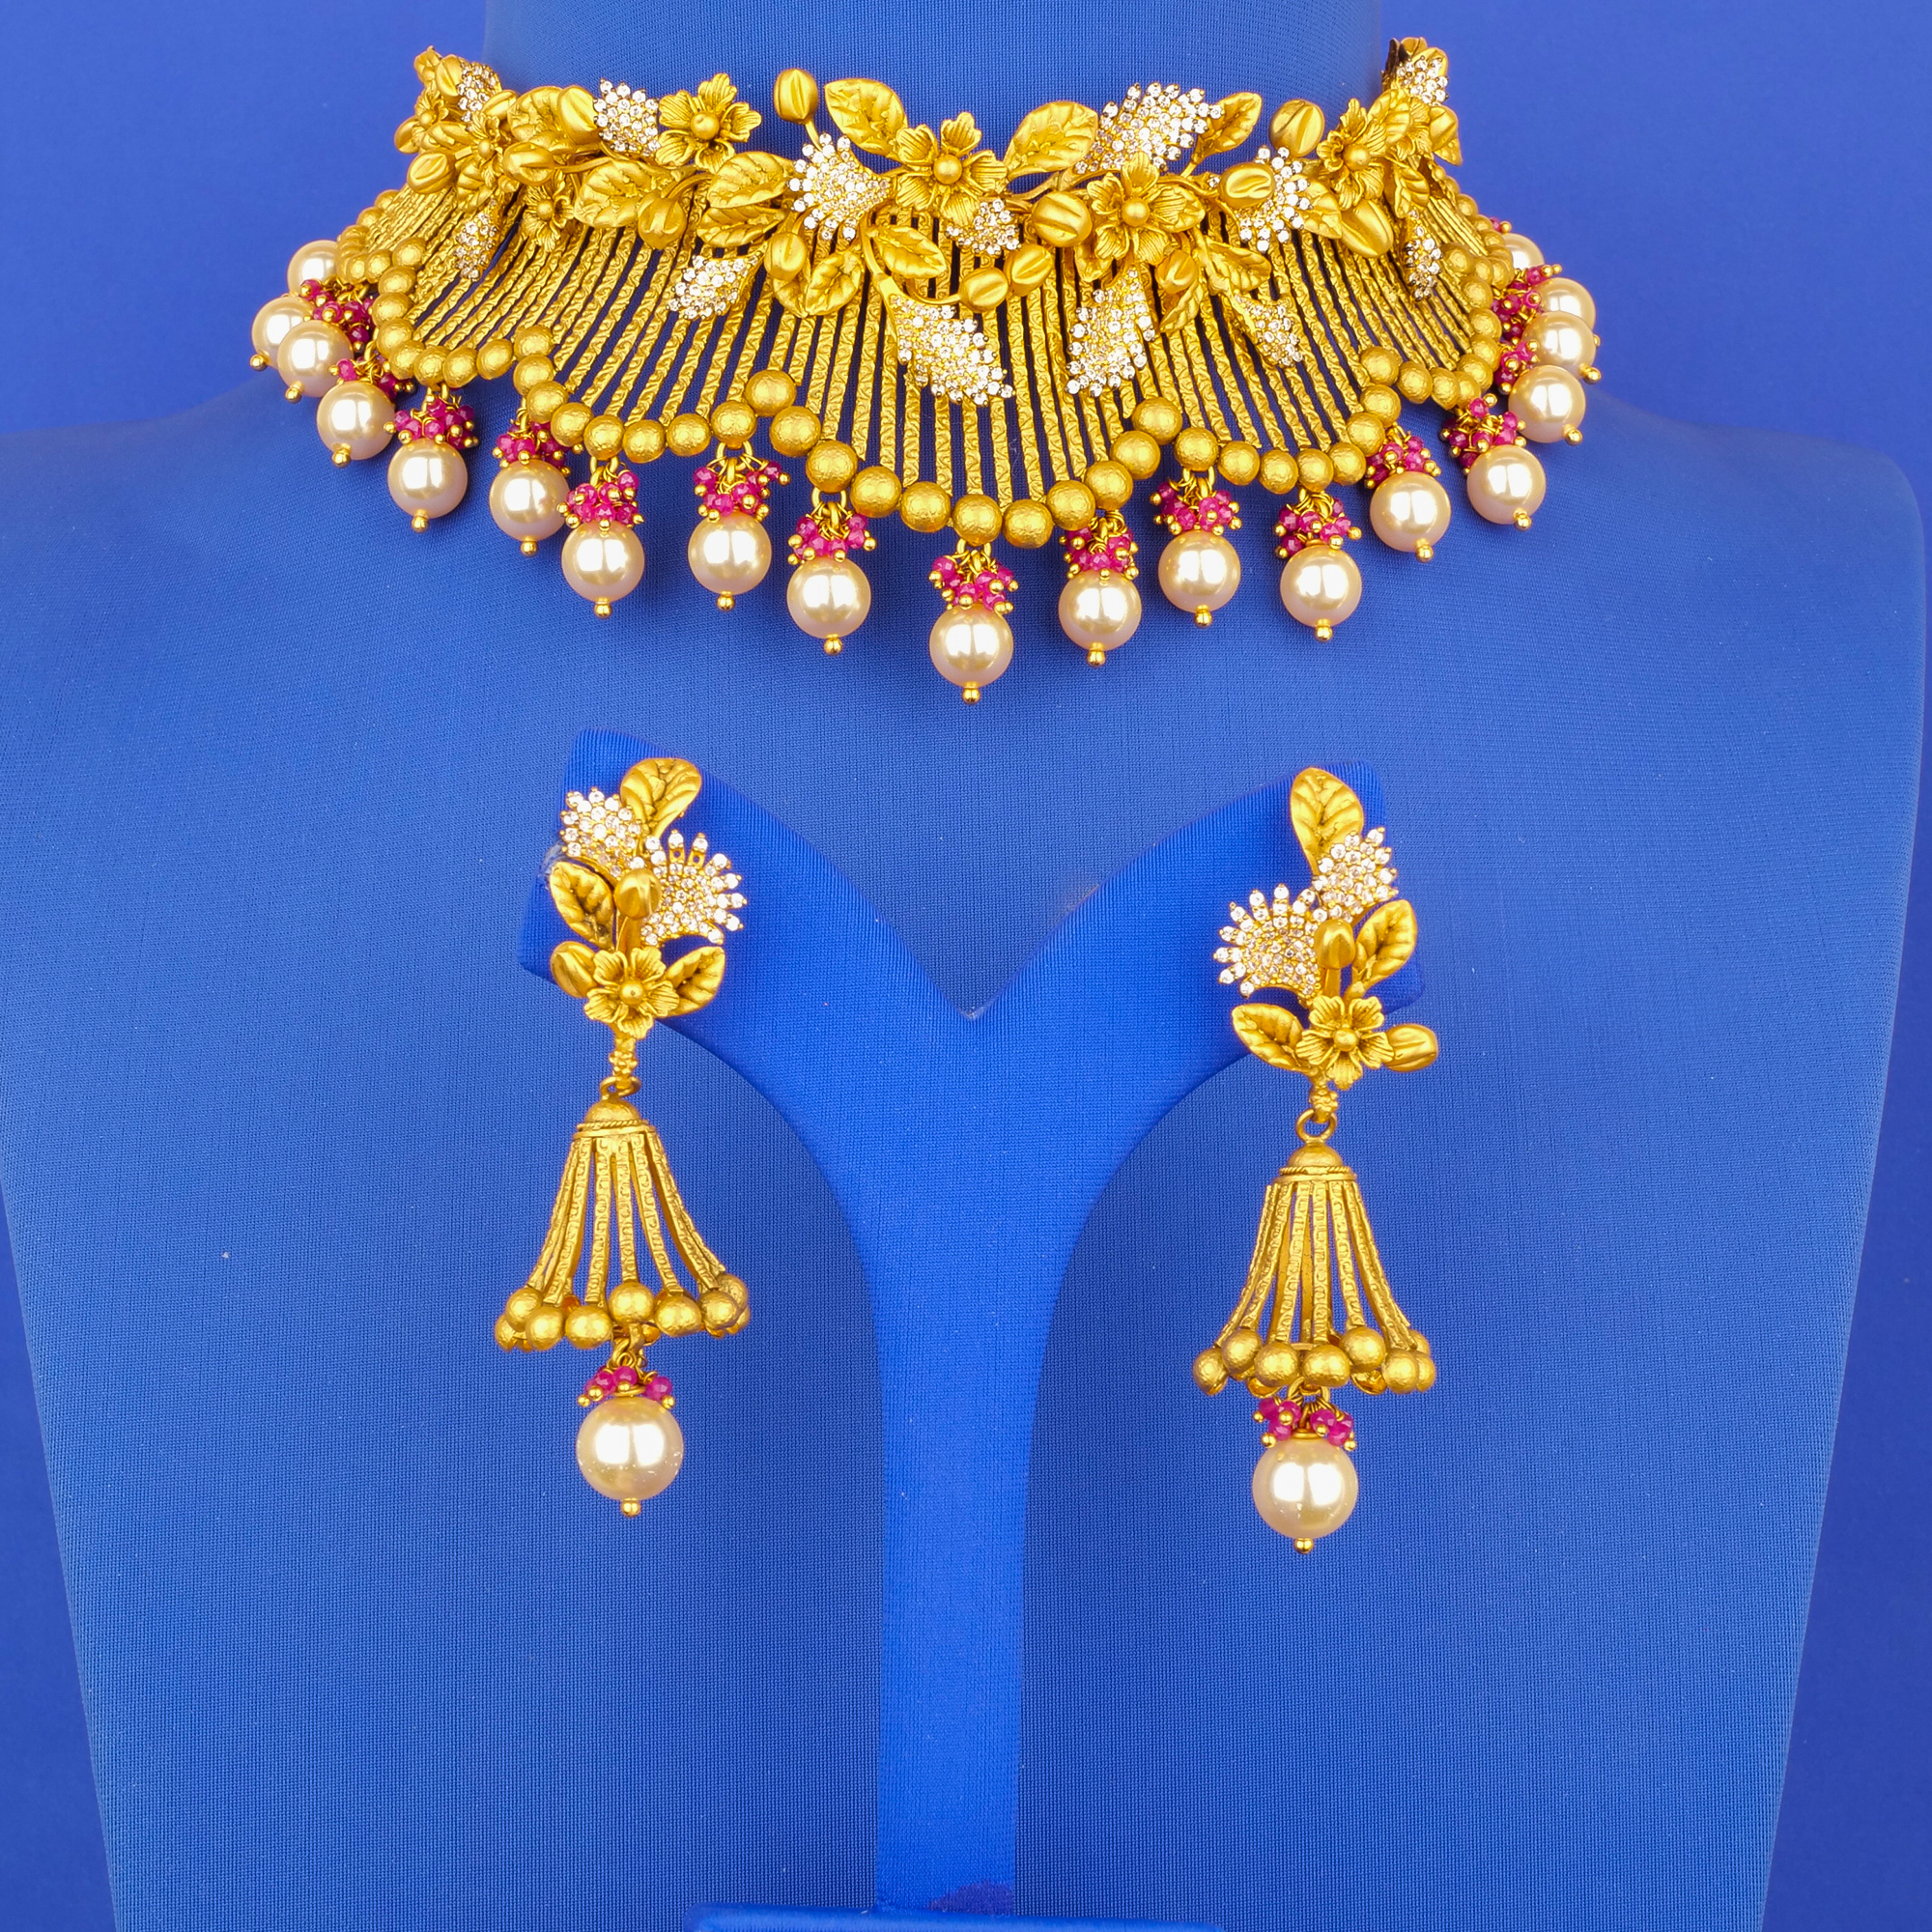 22K 'Antique' Gold Necklace and Earring Set w/ Stones